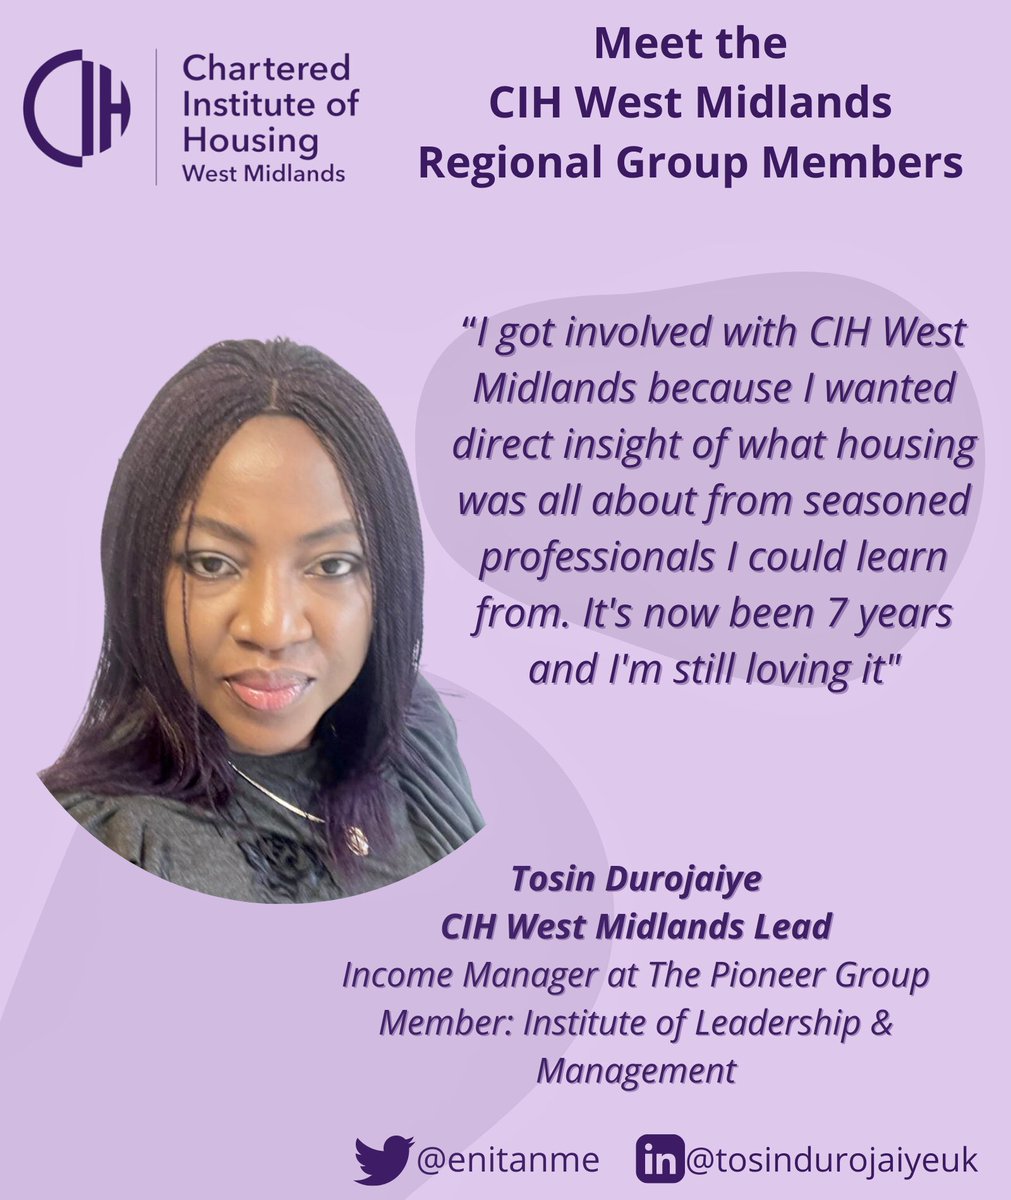 As we turn the spotlight on the CIH West Midlands Regional Group members, please say hello to 👇🏻 Tosin Durojaiye @enitanme is the CIH West Midlands Lead. She is also the Income Manager from @PioneerGroup_